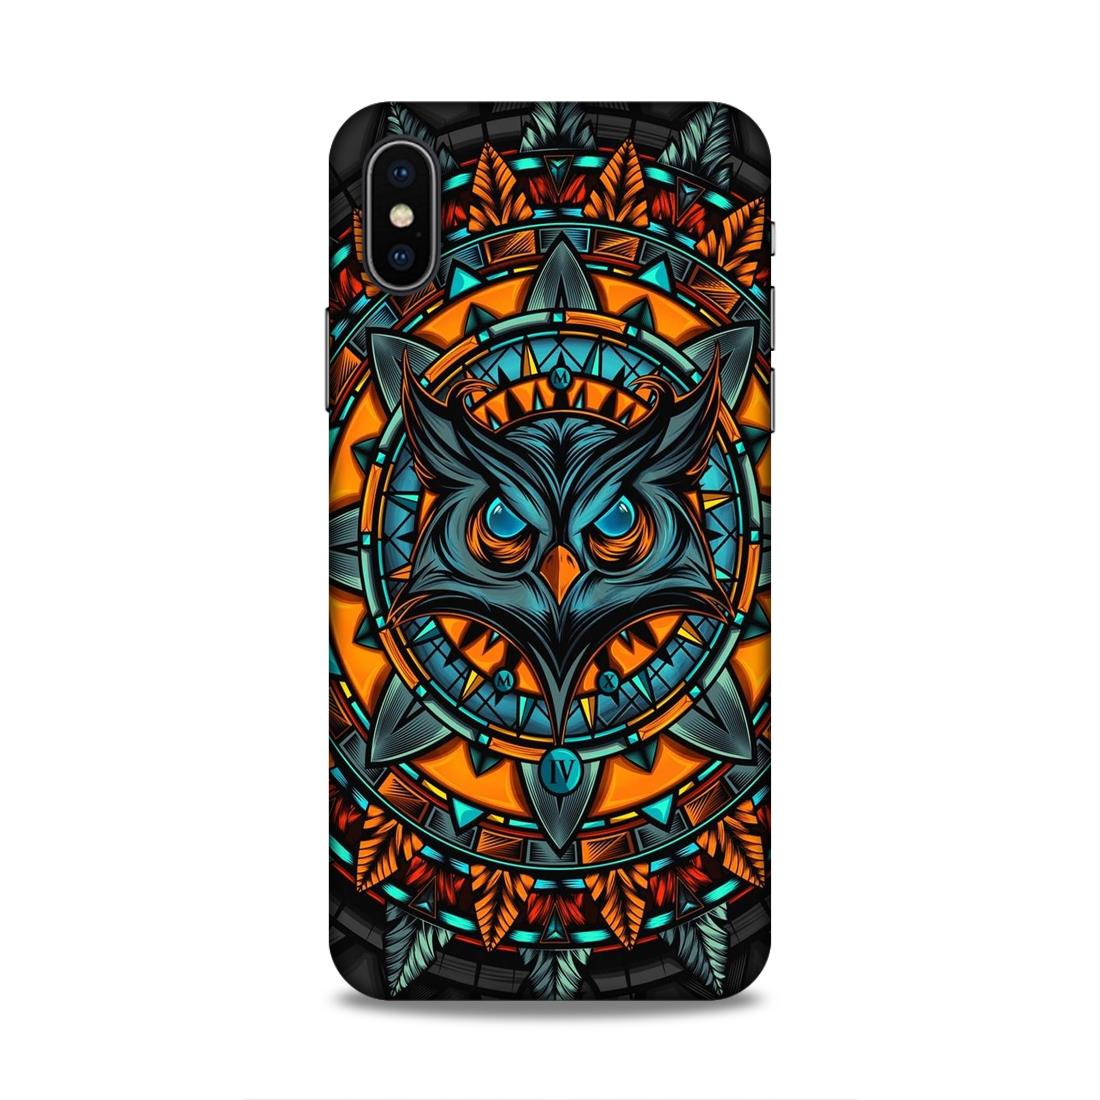 Owl Hard Back Case For Apple iPhone X/XS